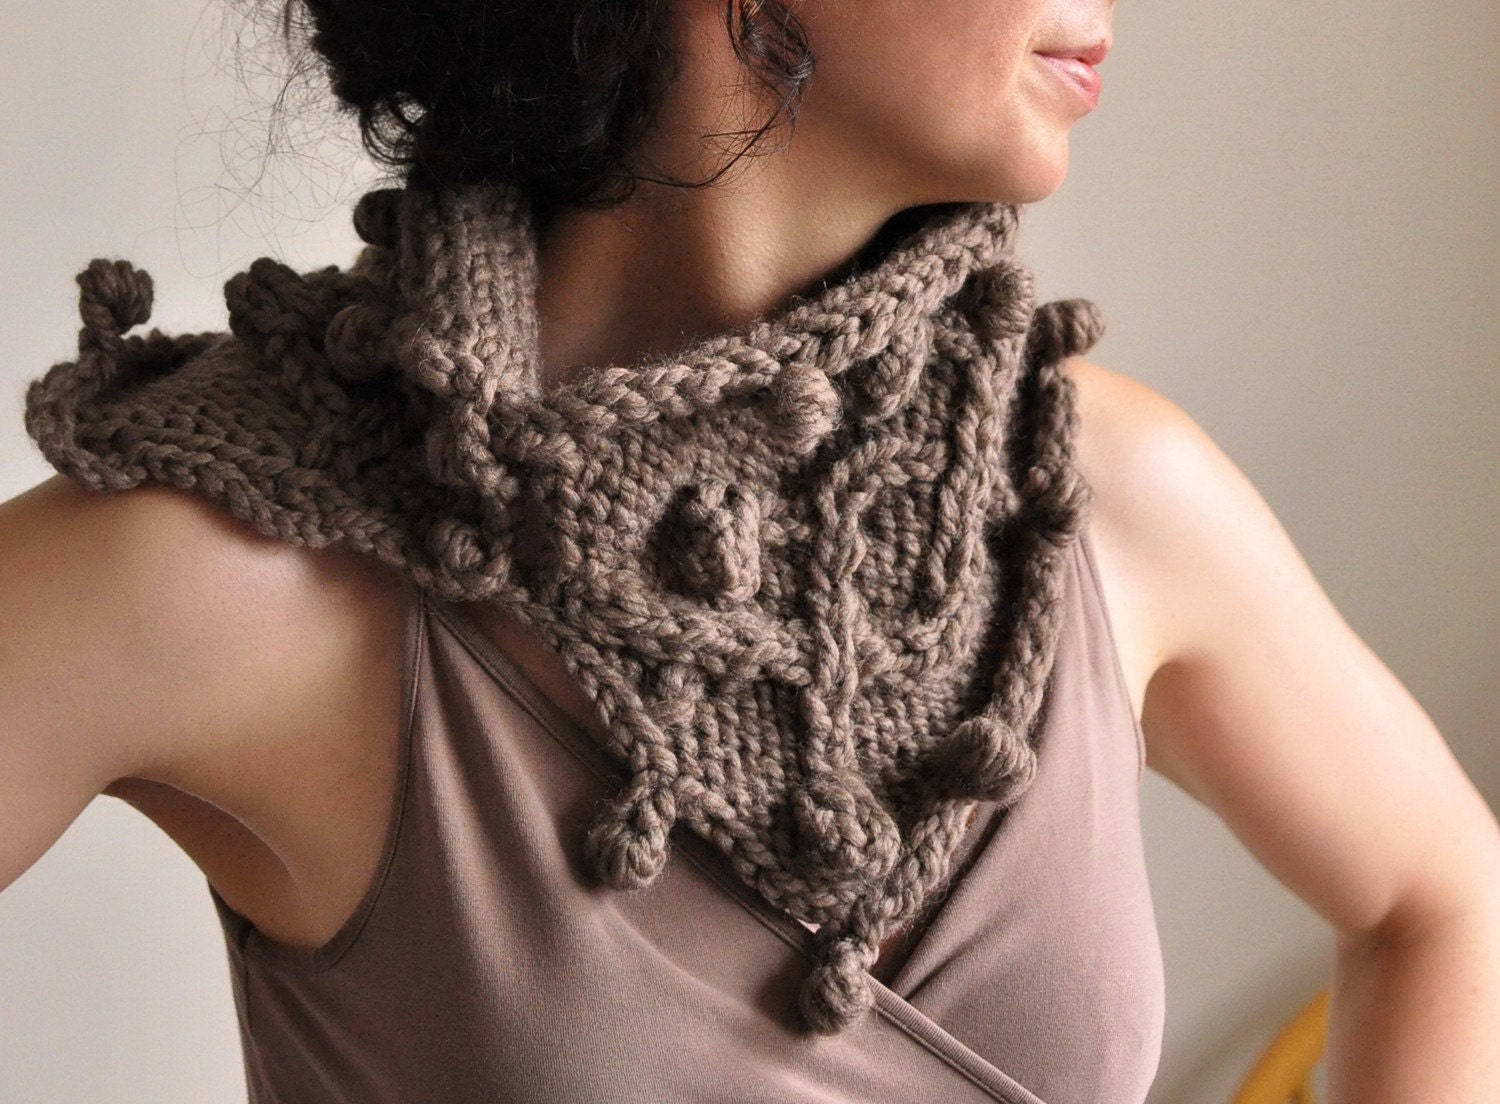 Heard It Through The Grapevine - superchunky designer handknit scarf / wrap / neckwarmer / cowl in taupe MADE TO ORDER in 16 colors